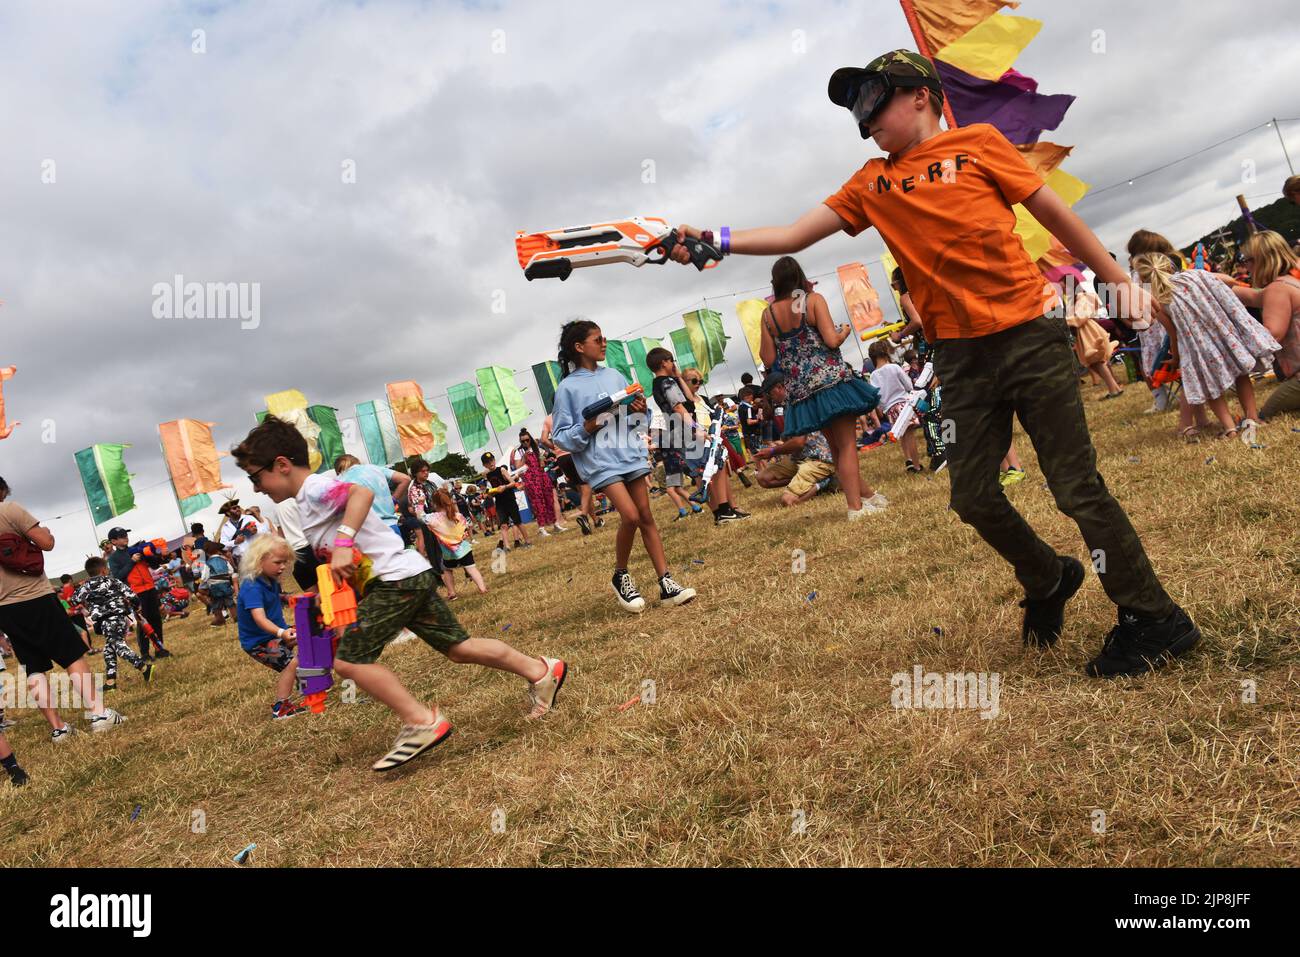 Families take part in a Nerf wars event @ Camp Bestival, Lulworth Castle and Estate, Dorset July 28 - 31 2022 Stock Photo